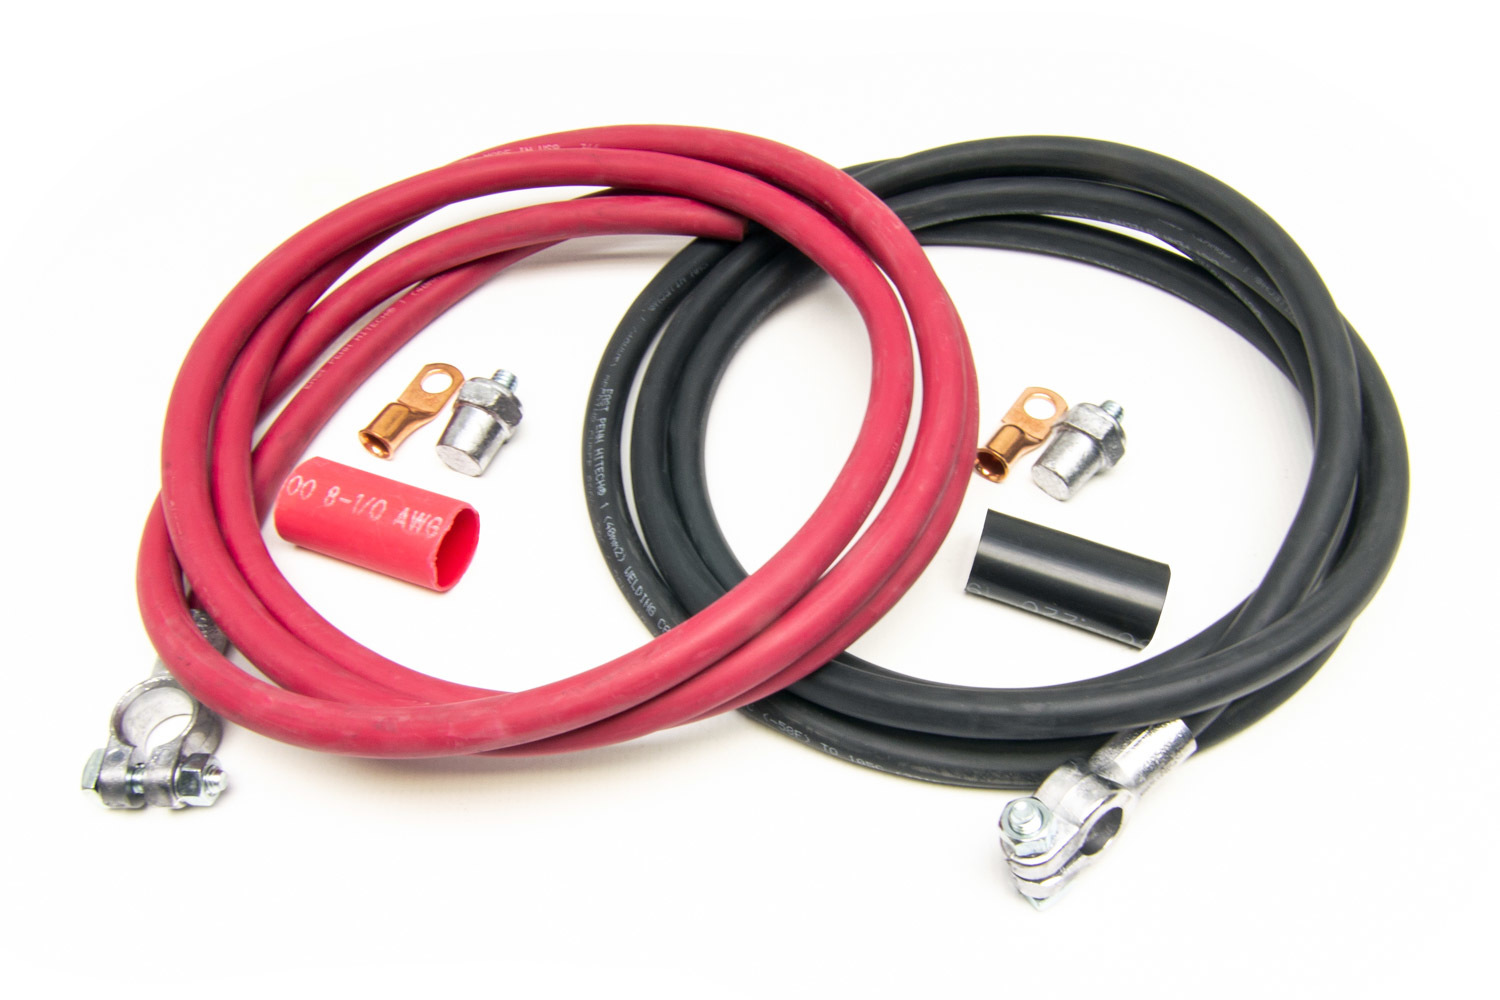 Painless Wiring 40107 Battery Cable Kit, 1 Gauge, Top Mount Battery Terminals, Side Post Adapters / Terminals / Heat Shrink Included, Copper, 8 ft Red / 8 ft Black, Kit